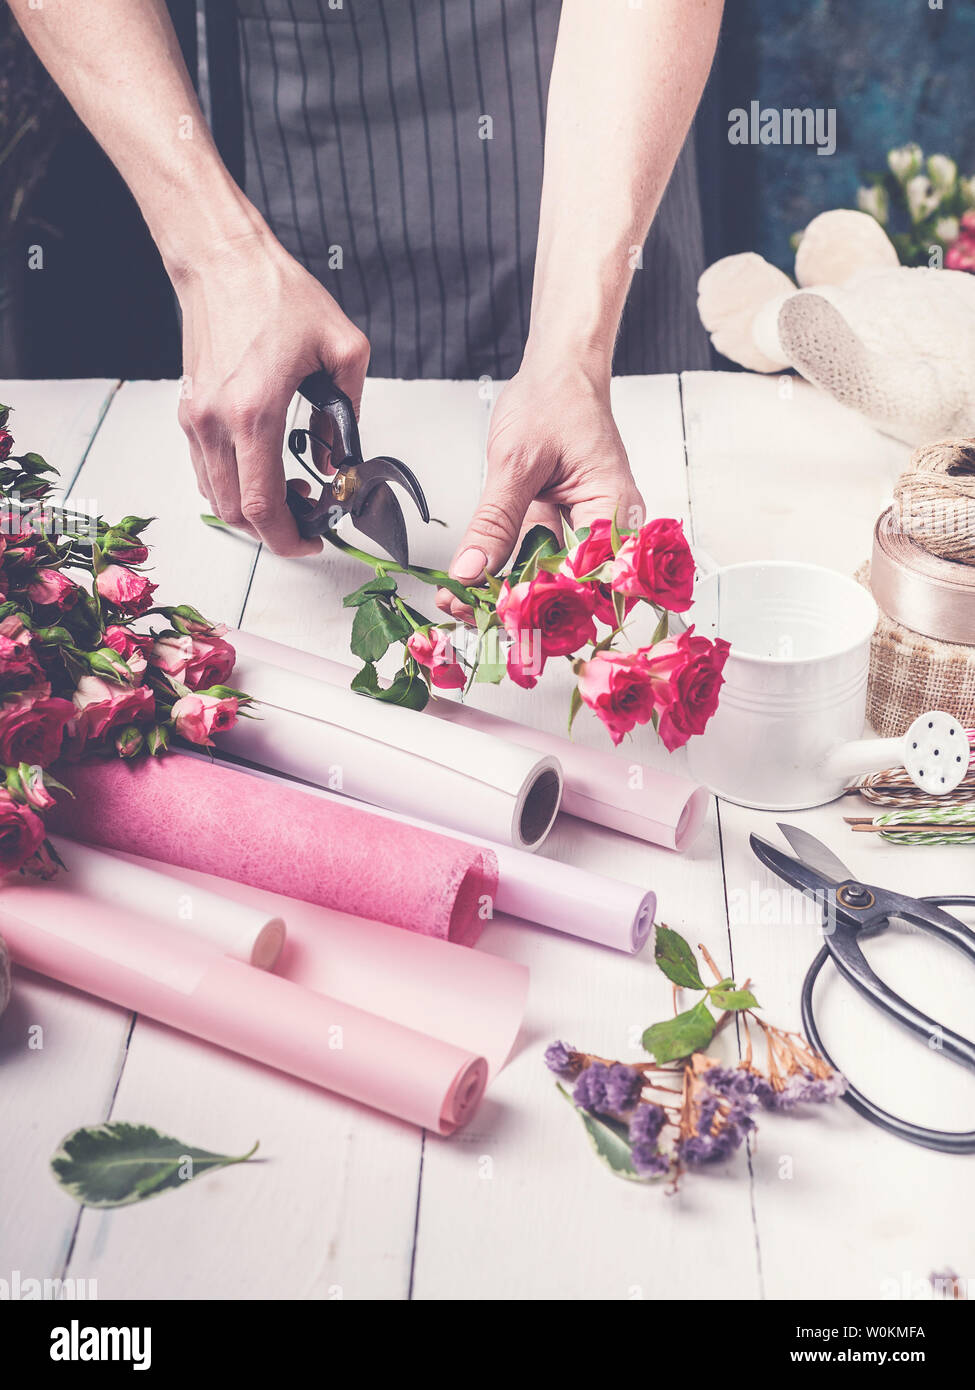 Florist at work. Female hands collect a wedding bouquet of roses. Small business concept Stock Photo